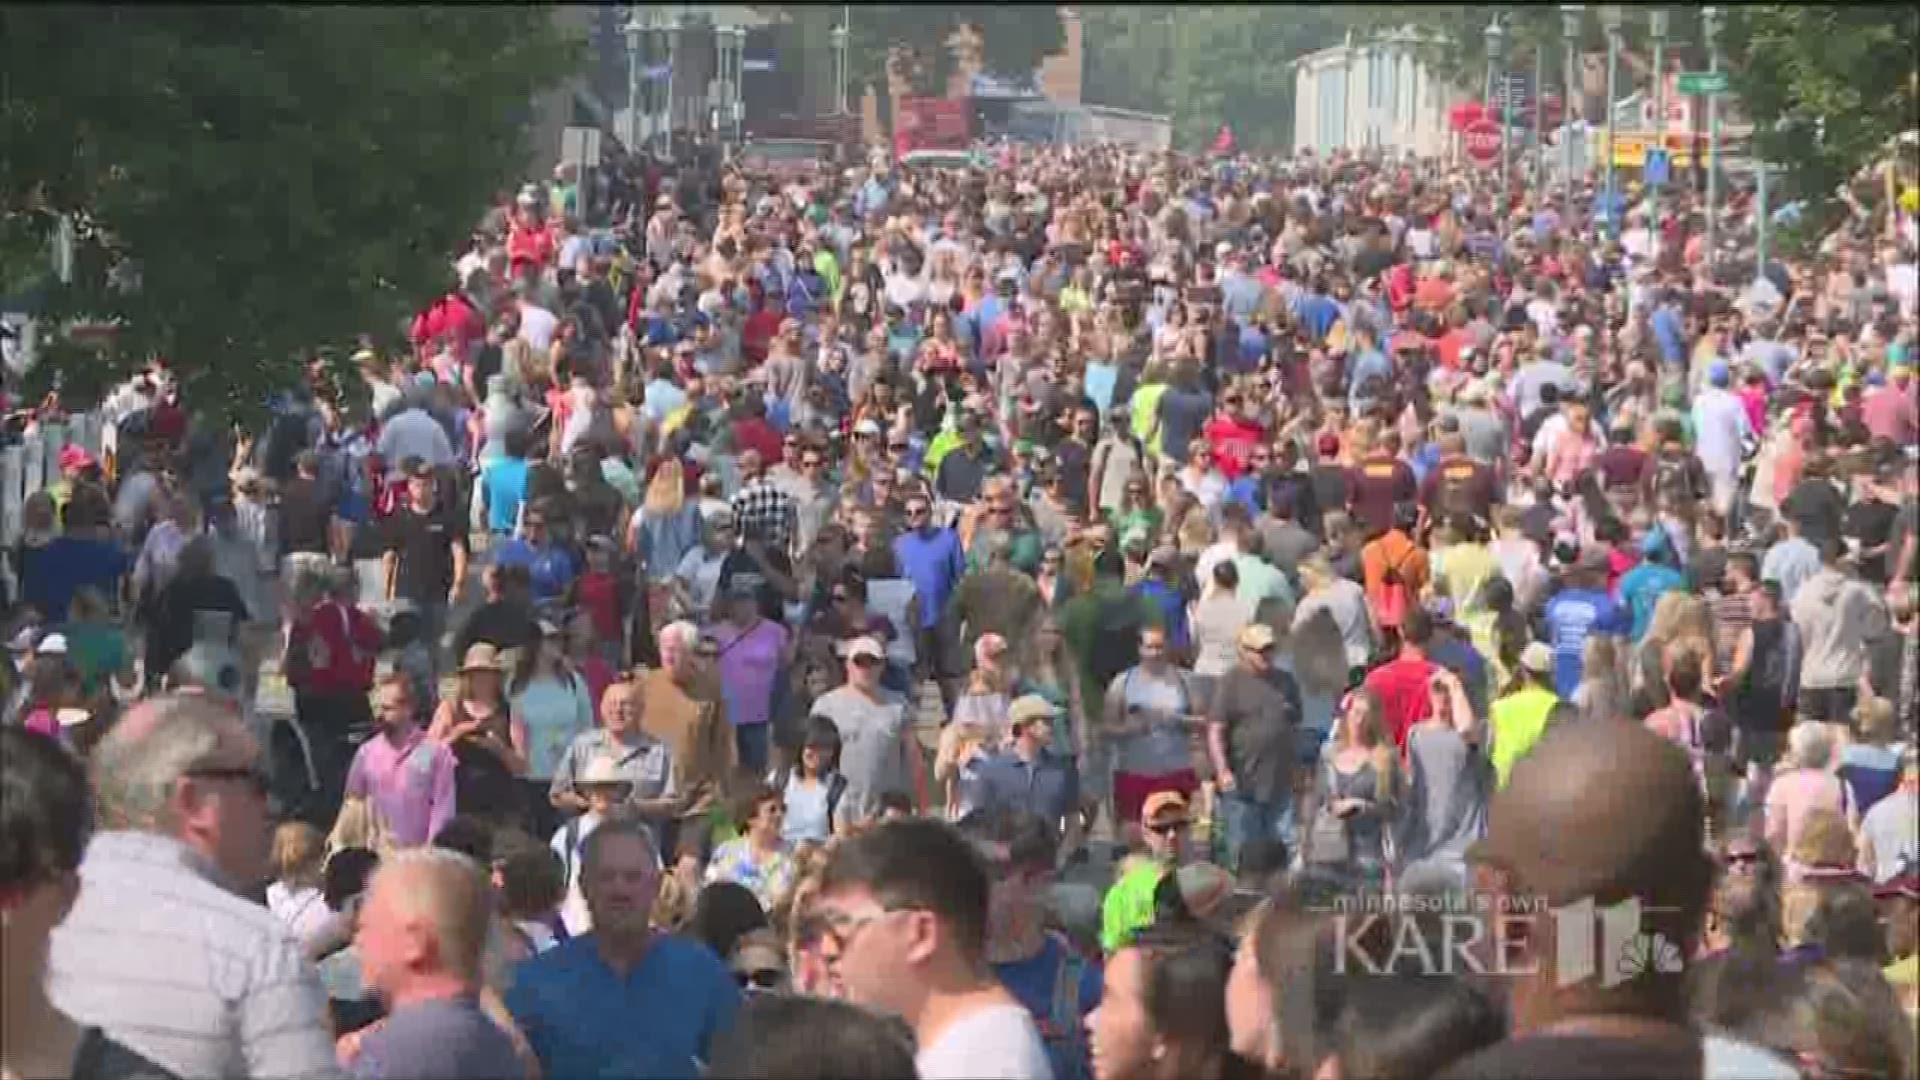 Beautiful weather on Sunday helped propel the Minnesota State Fair to its largest Sunday crowd ever, and now the Great Minnesota Get Together could be heading toward its greatest feat: an overall attendance of 2 million people. http://kare11.tv/2w0wHRV